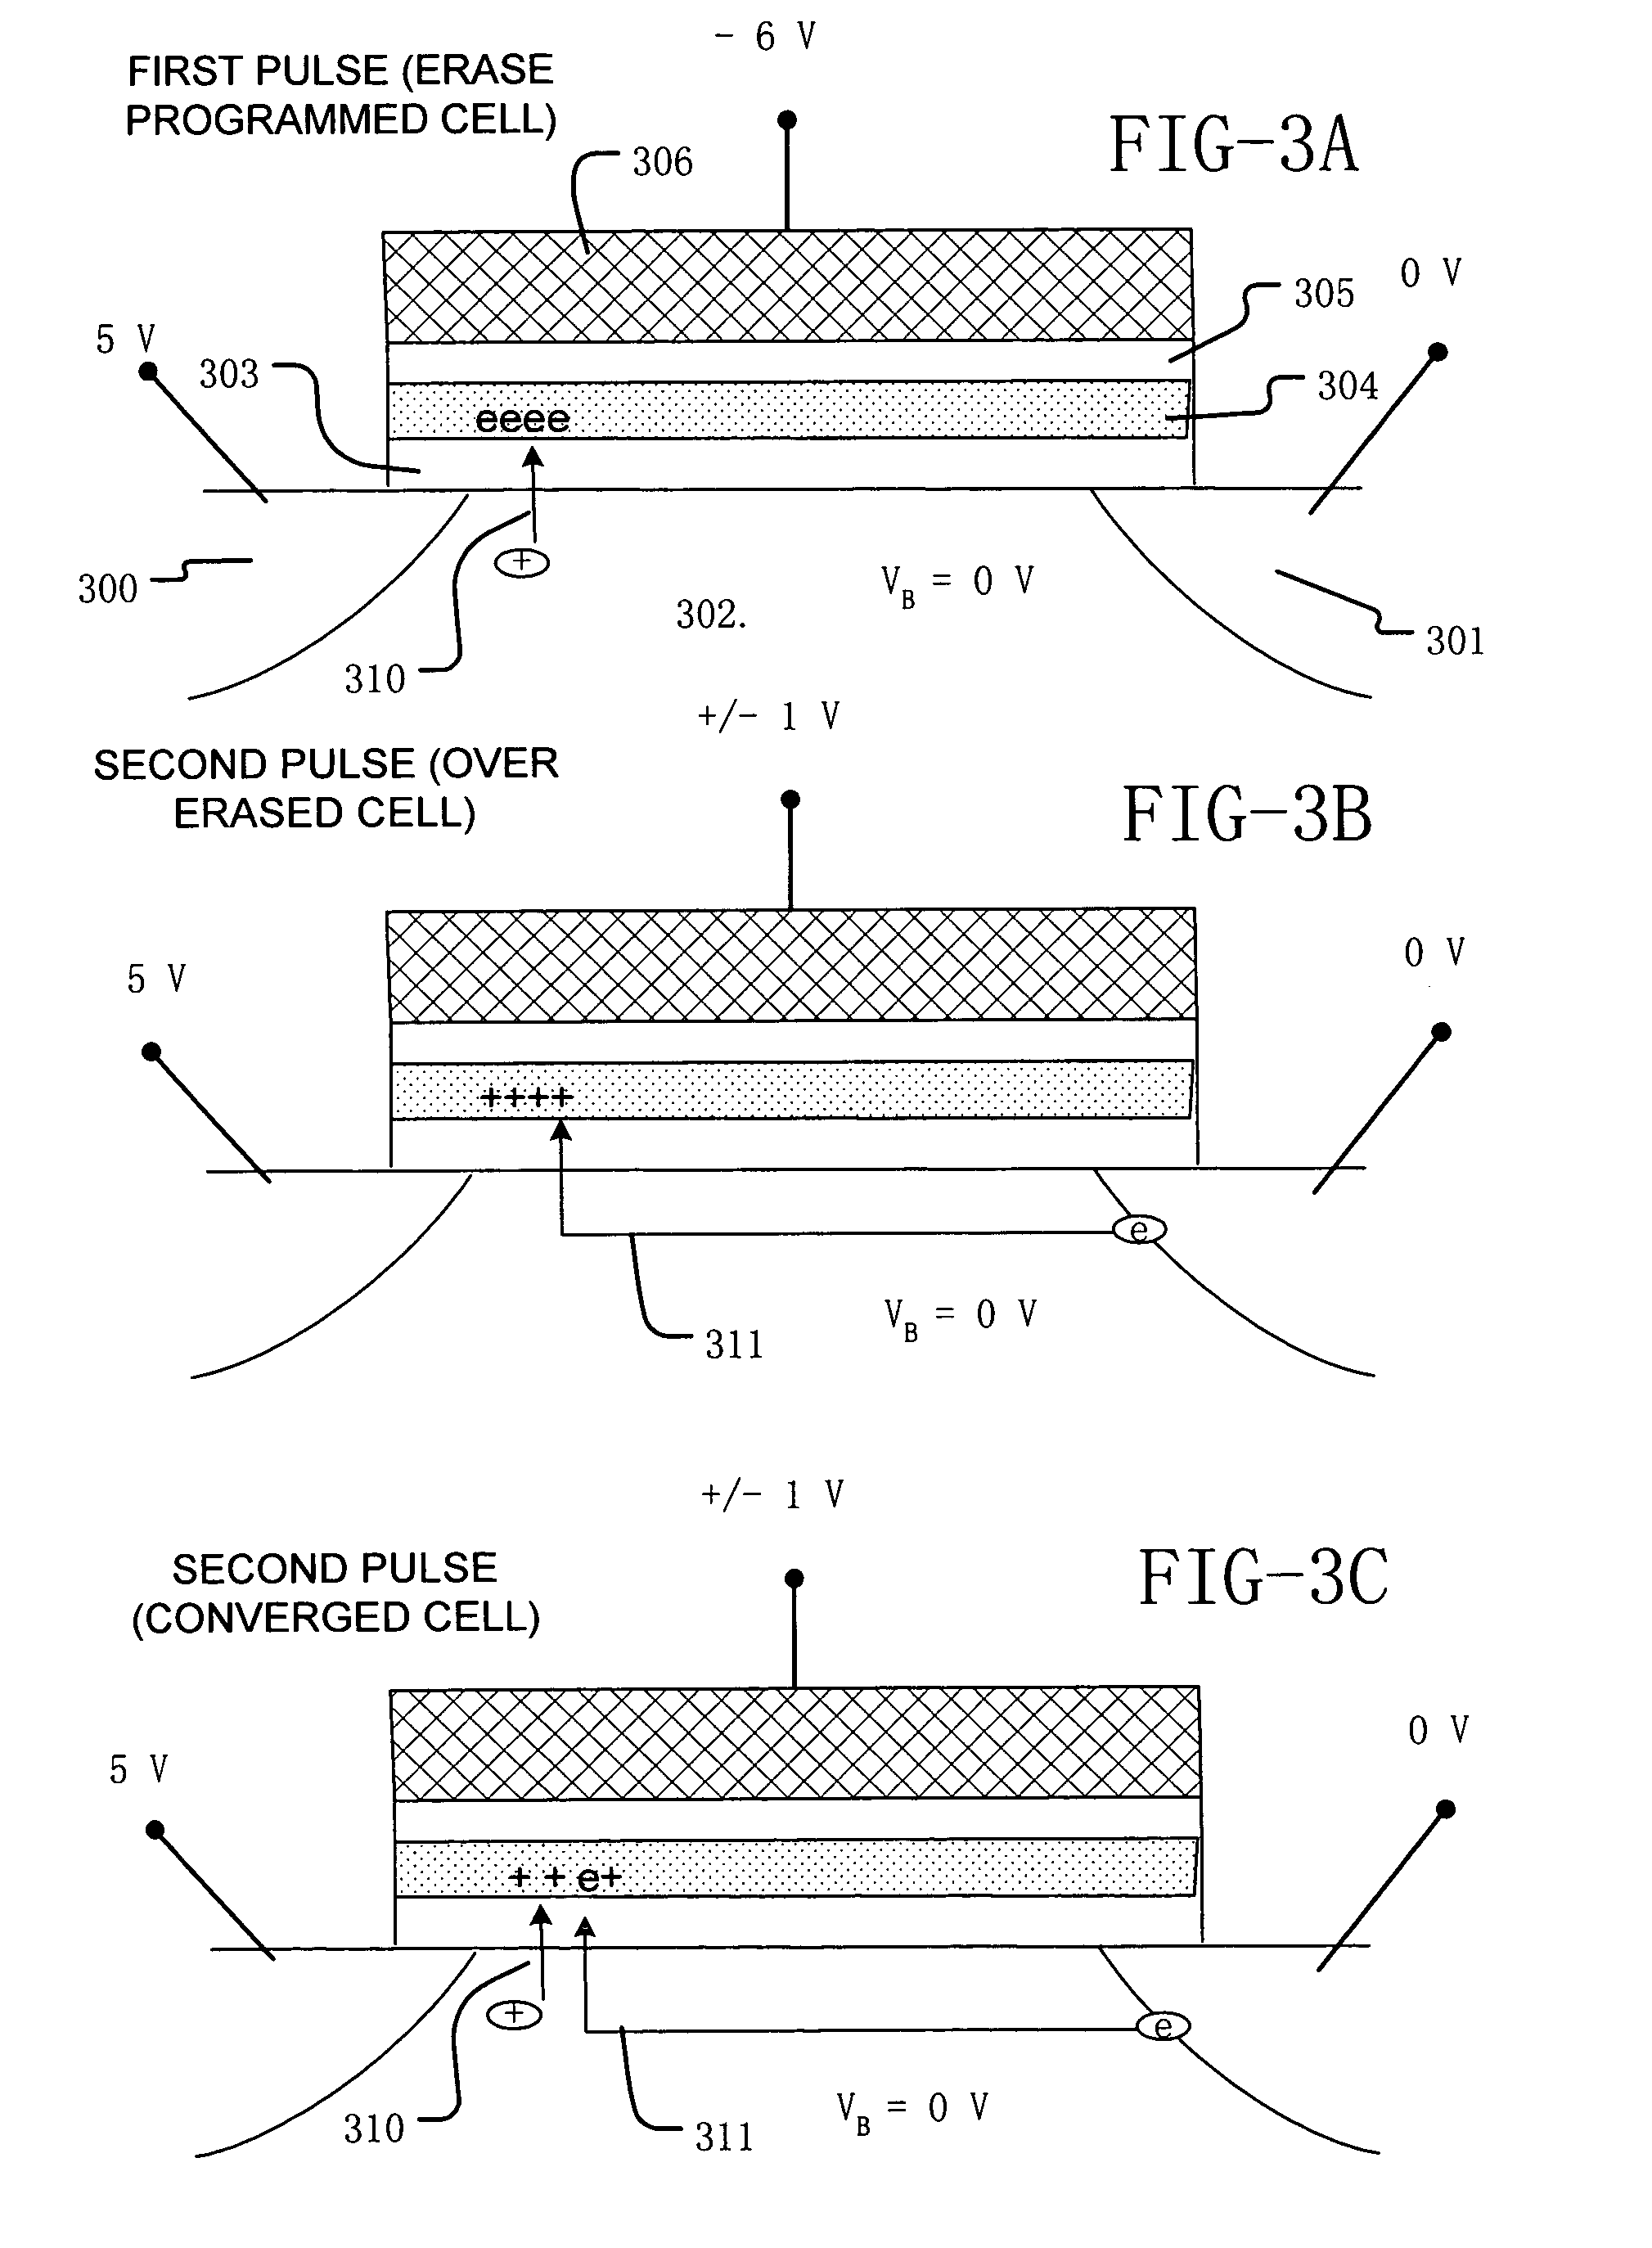 Method and system for self-convergent erase in charge trapping memory cells